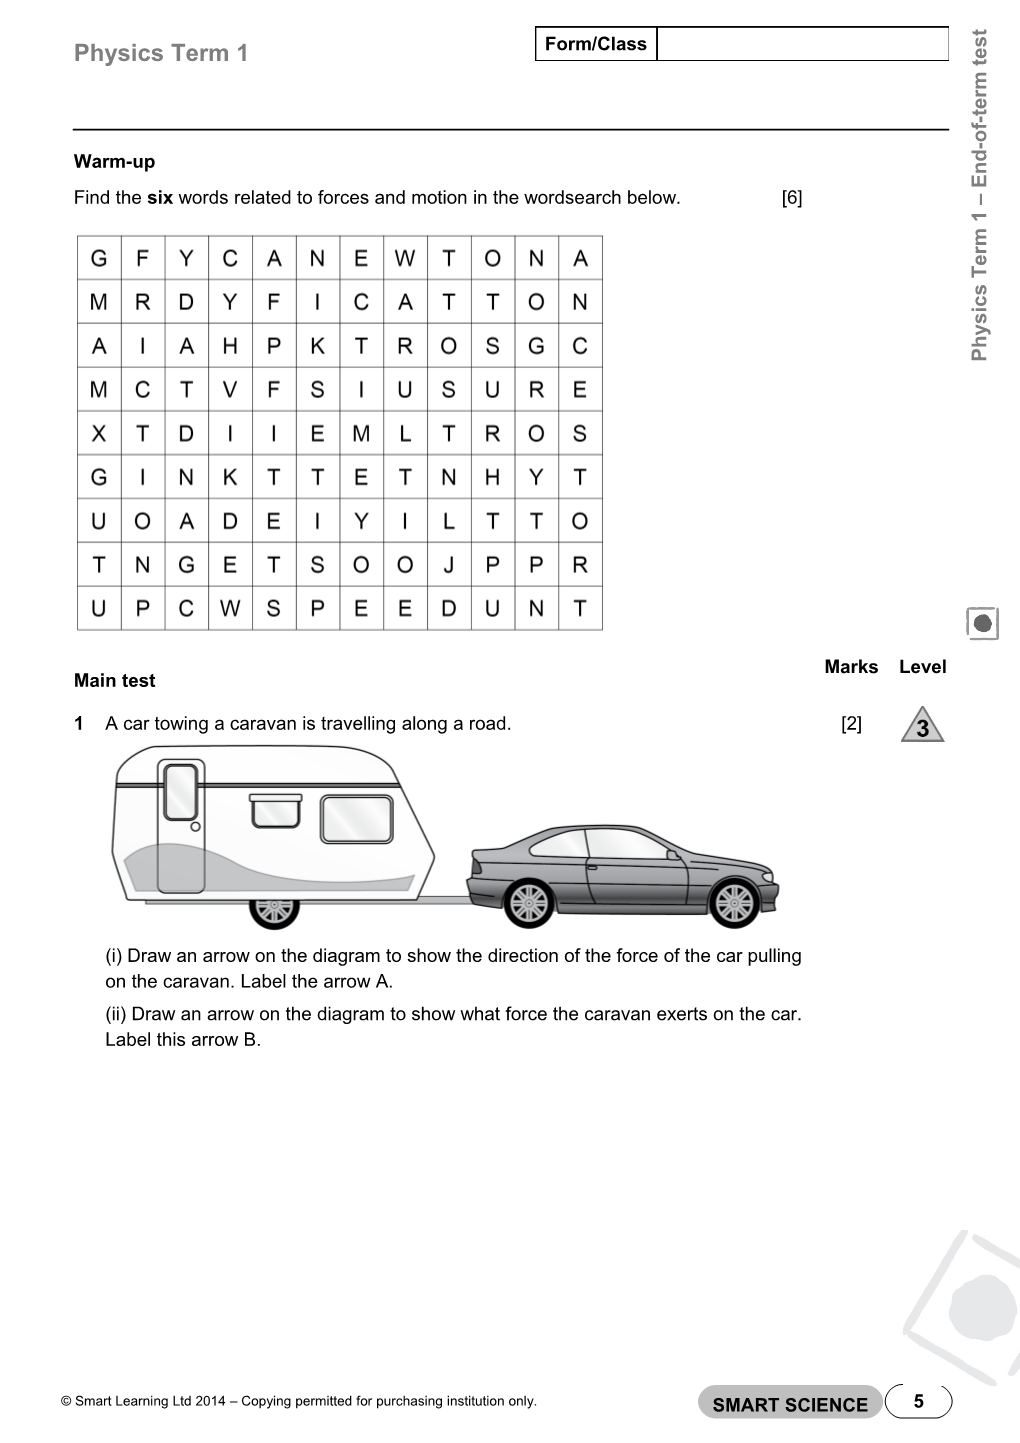 Find the Six Words Related to Forces and Motion in the Wordsearch Below. 6